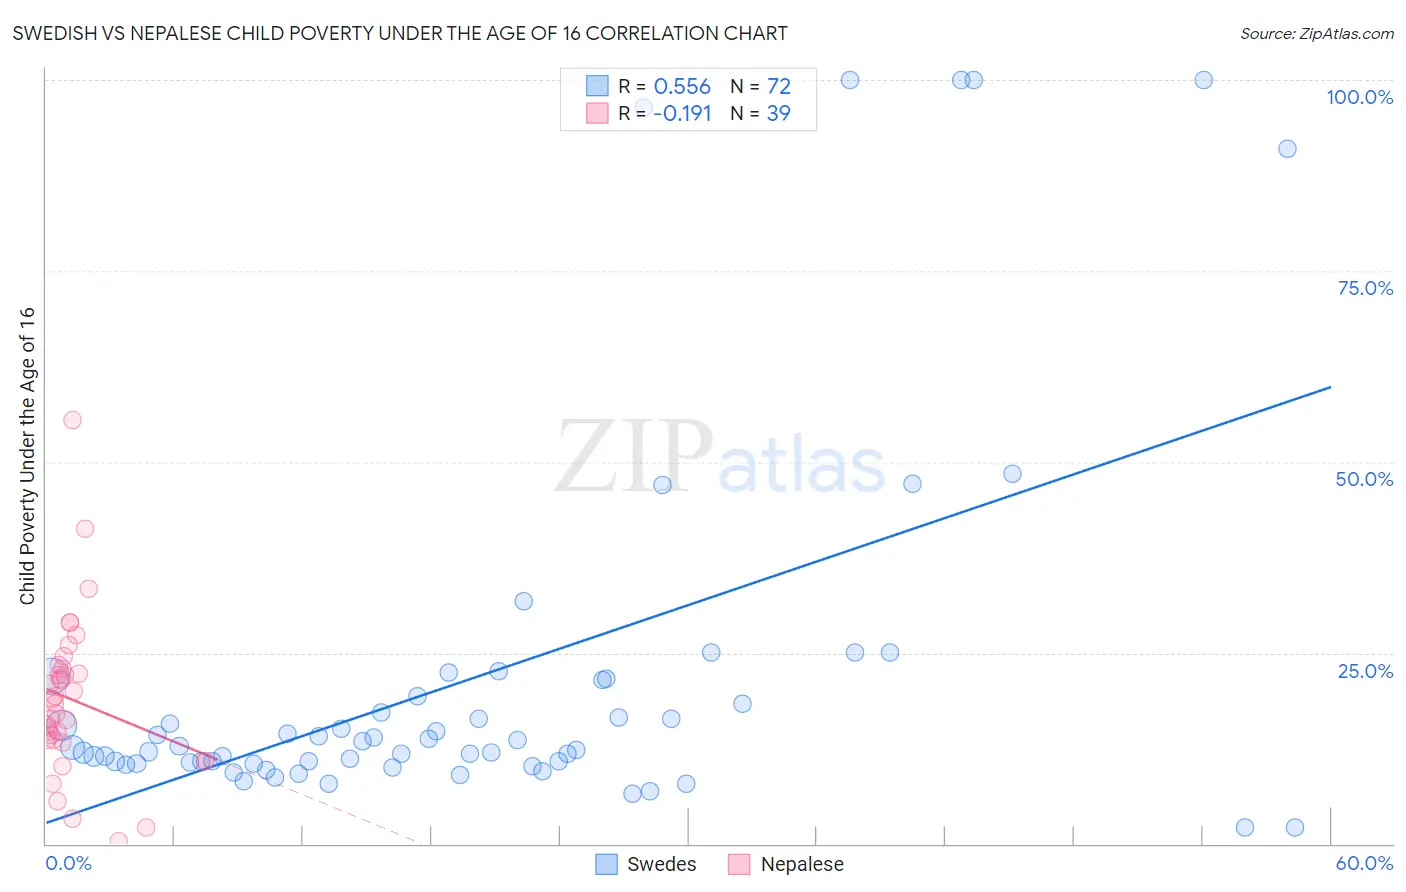 Swedish vs Nepalese Child Poverty Under the Age of 16